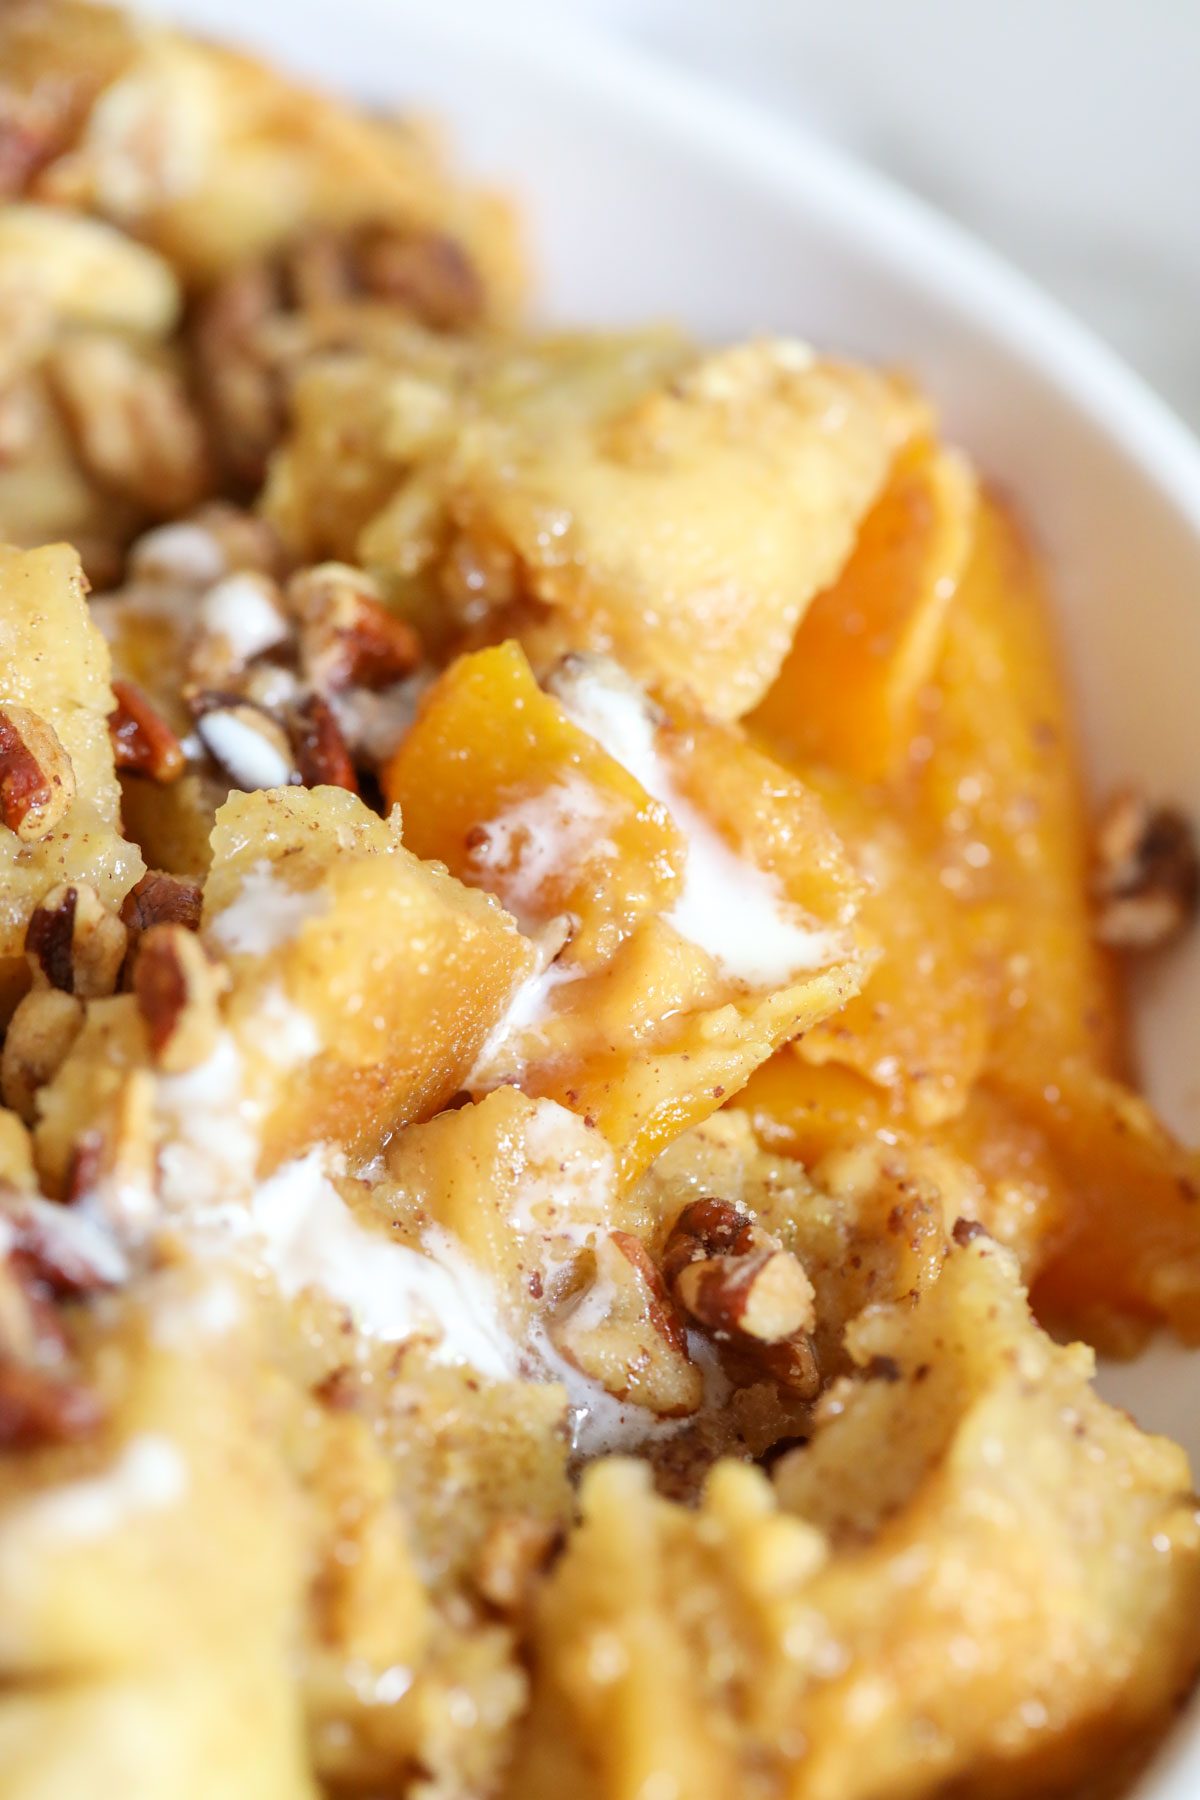 up close view of peach bread pudding with candied walnuts